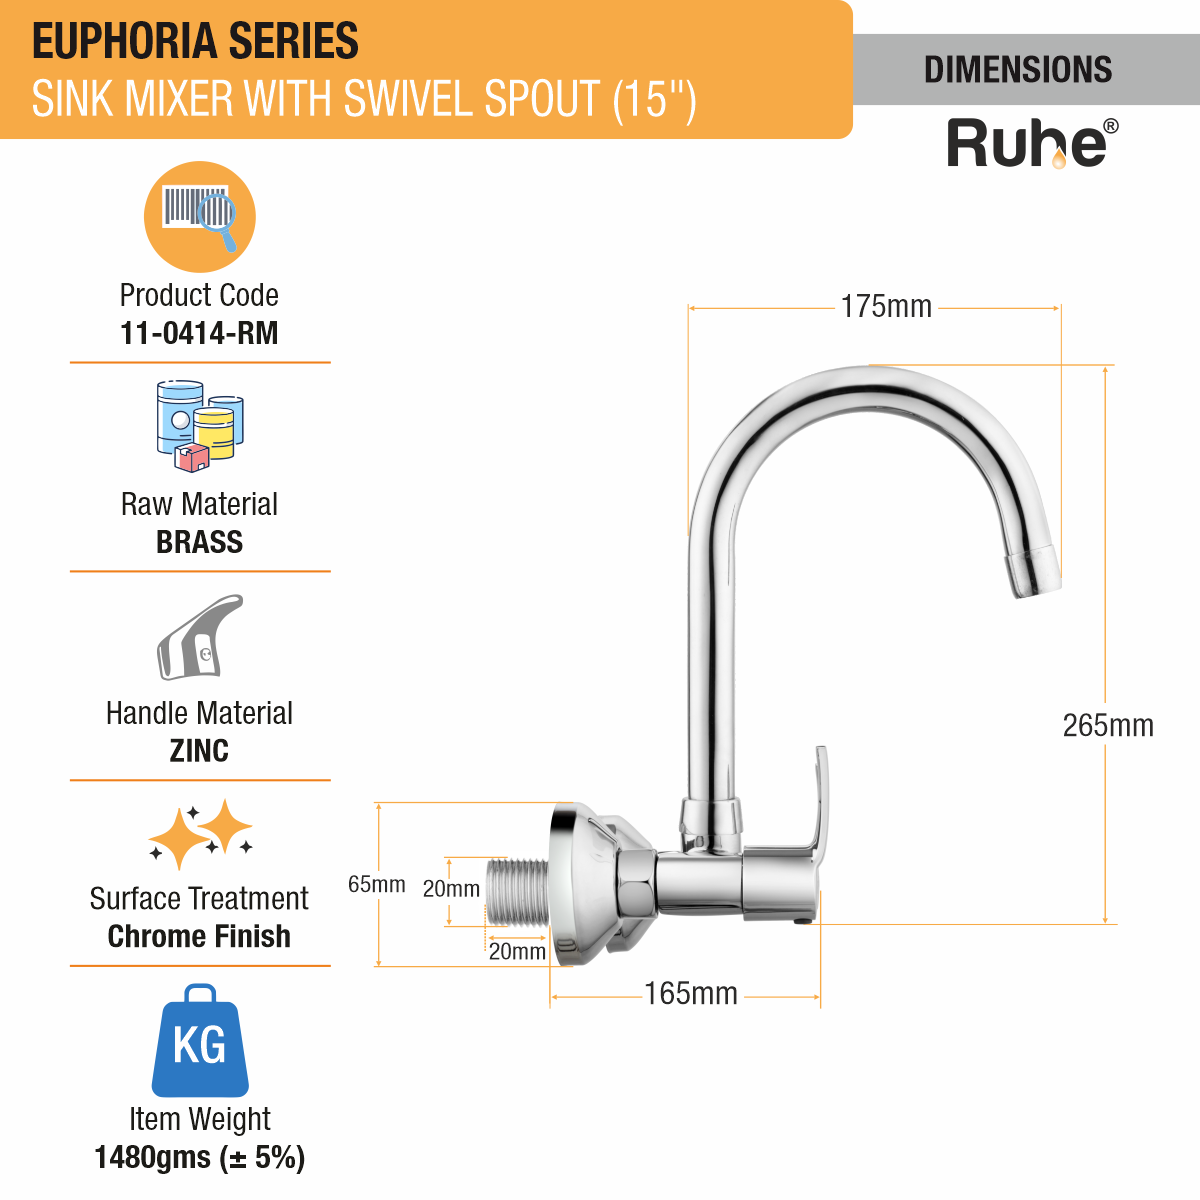 Euphoria Sink Mixer with Medium (15 inches) Round Swivel Spout Faucet dimensions and size